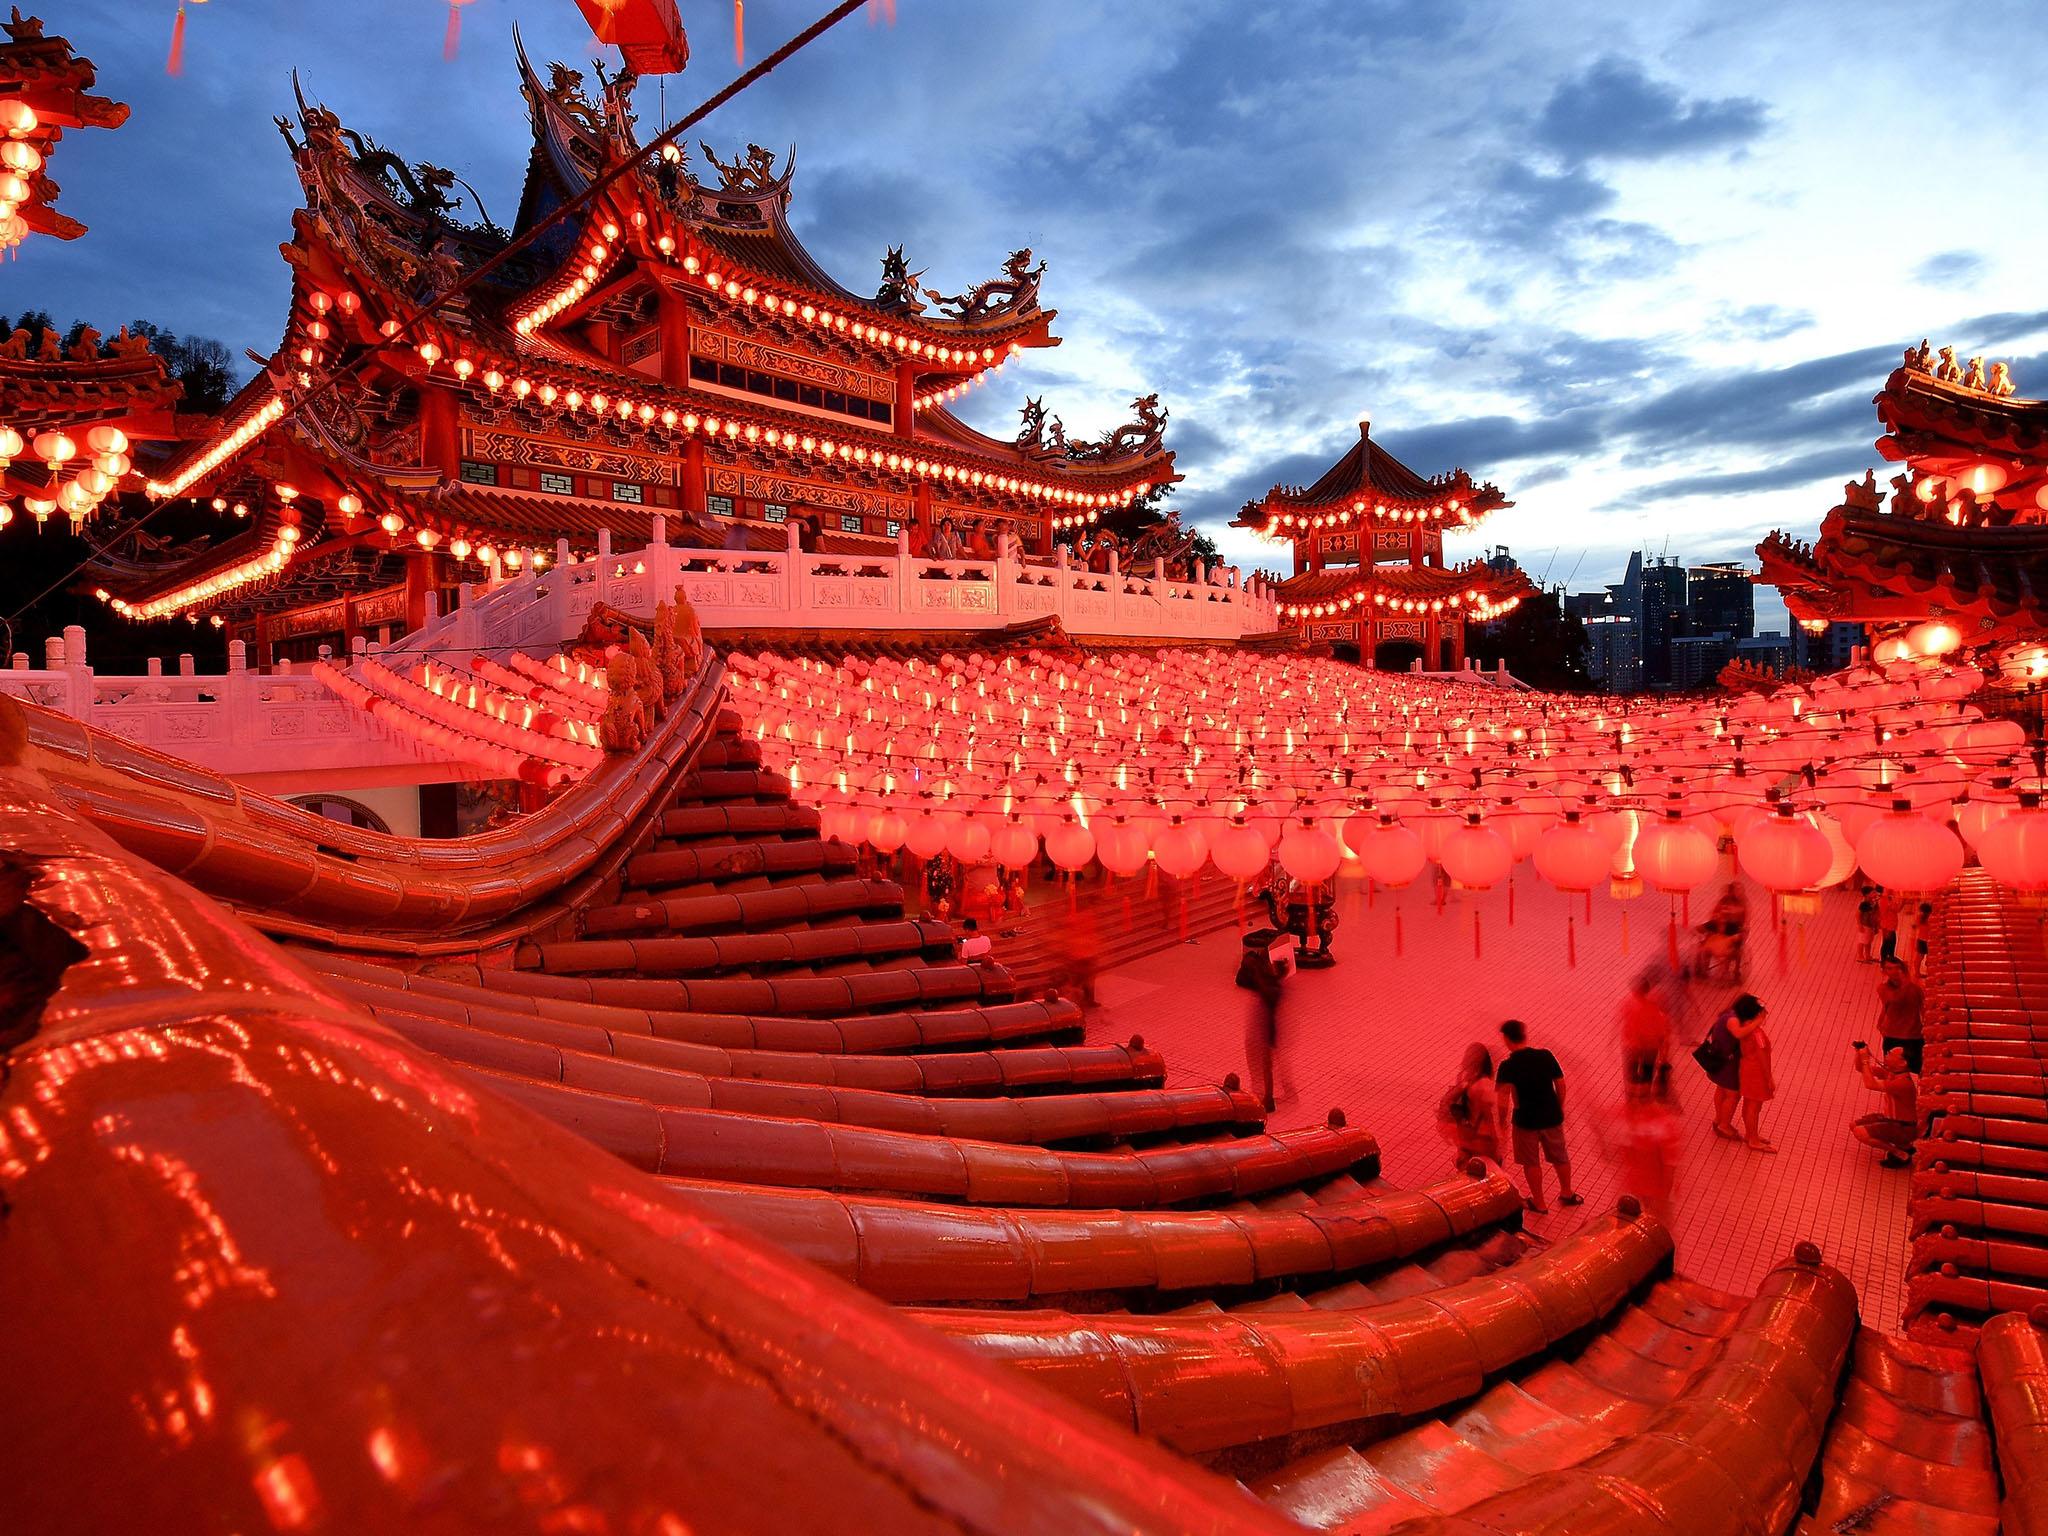 The Thean Hou temple is decorated with red lanterns in Kuala Lumpur, Malaysia, in preparation for the 2017 New Year celebrations